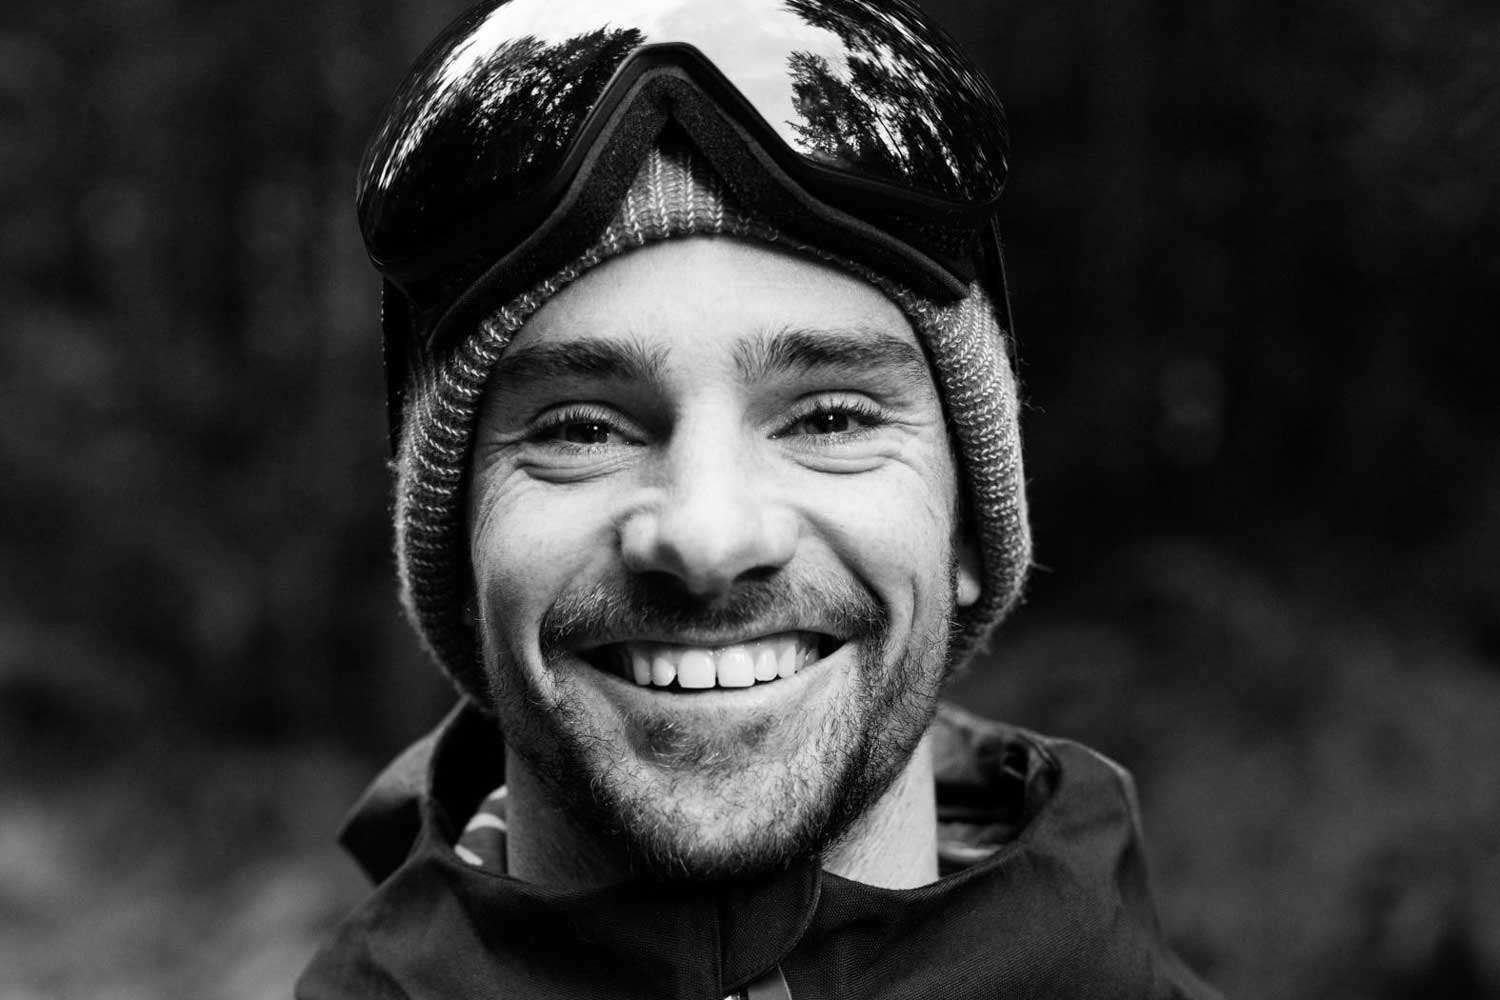 Mathieu Crepel, a “Ulysses” and world champion snowboarder, Olympic medalist and surfer